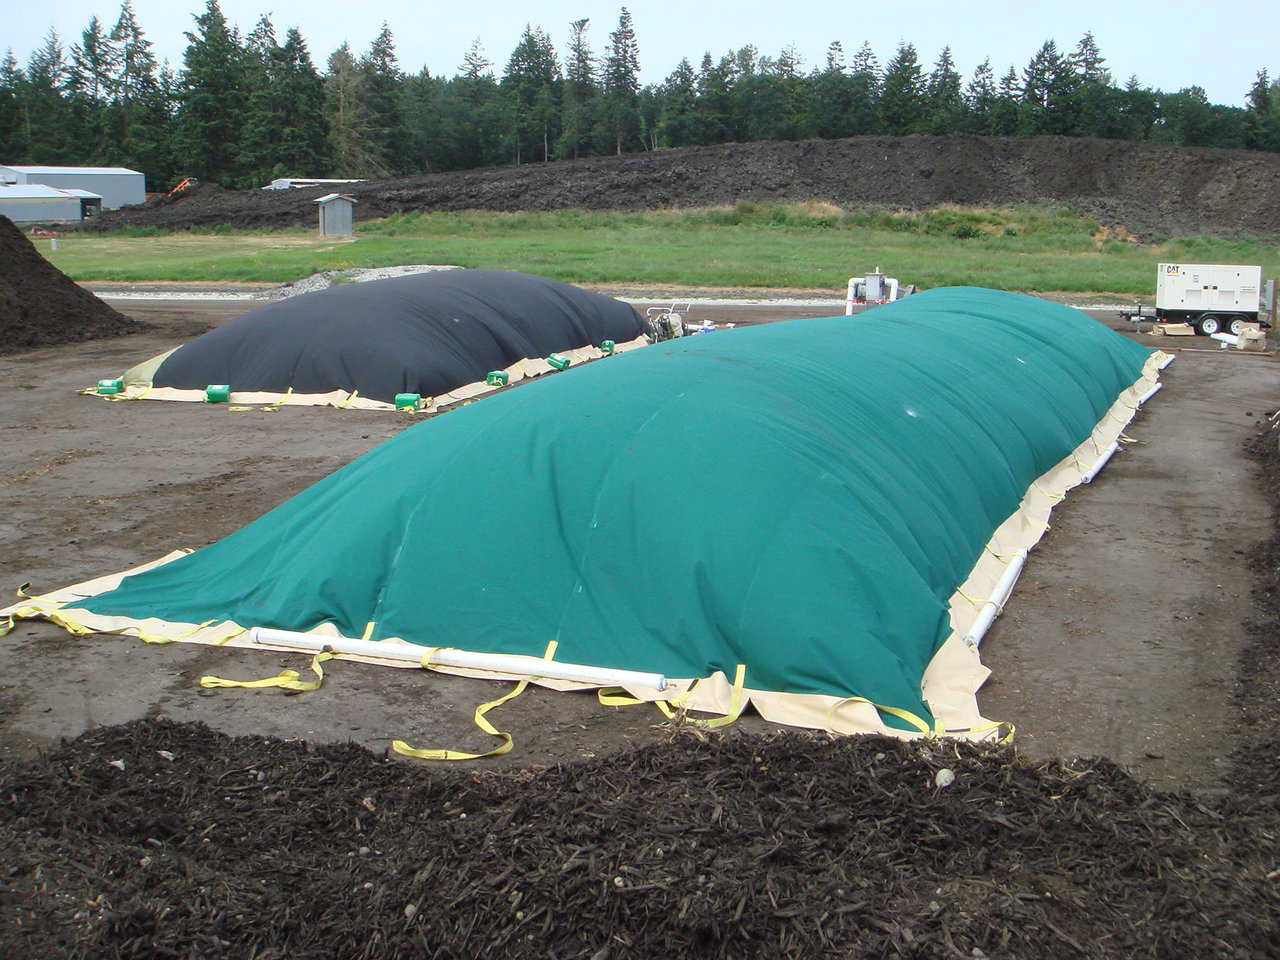 Compost Cover — Manufactured in Bruco, these compost covers create an odor free option for the composting industry and home composters alike.  See www.odorfreecompost.com.